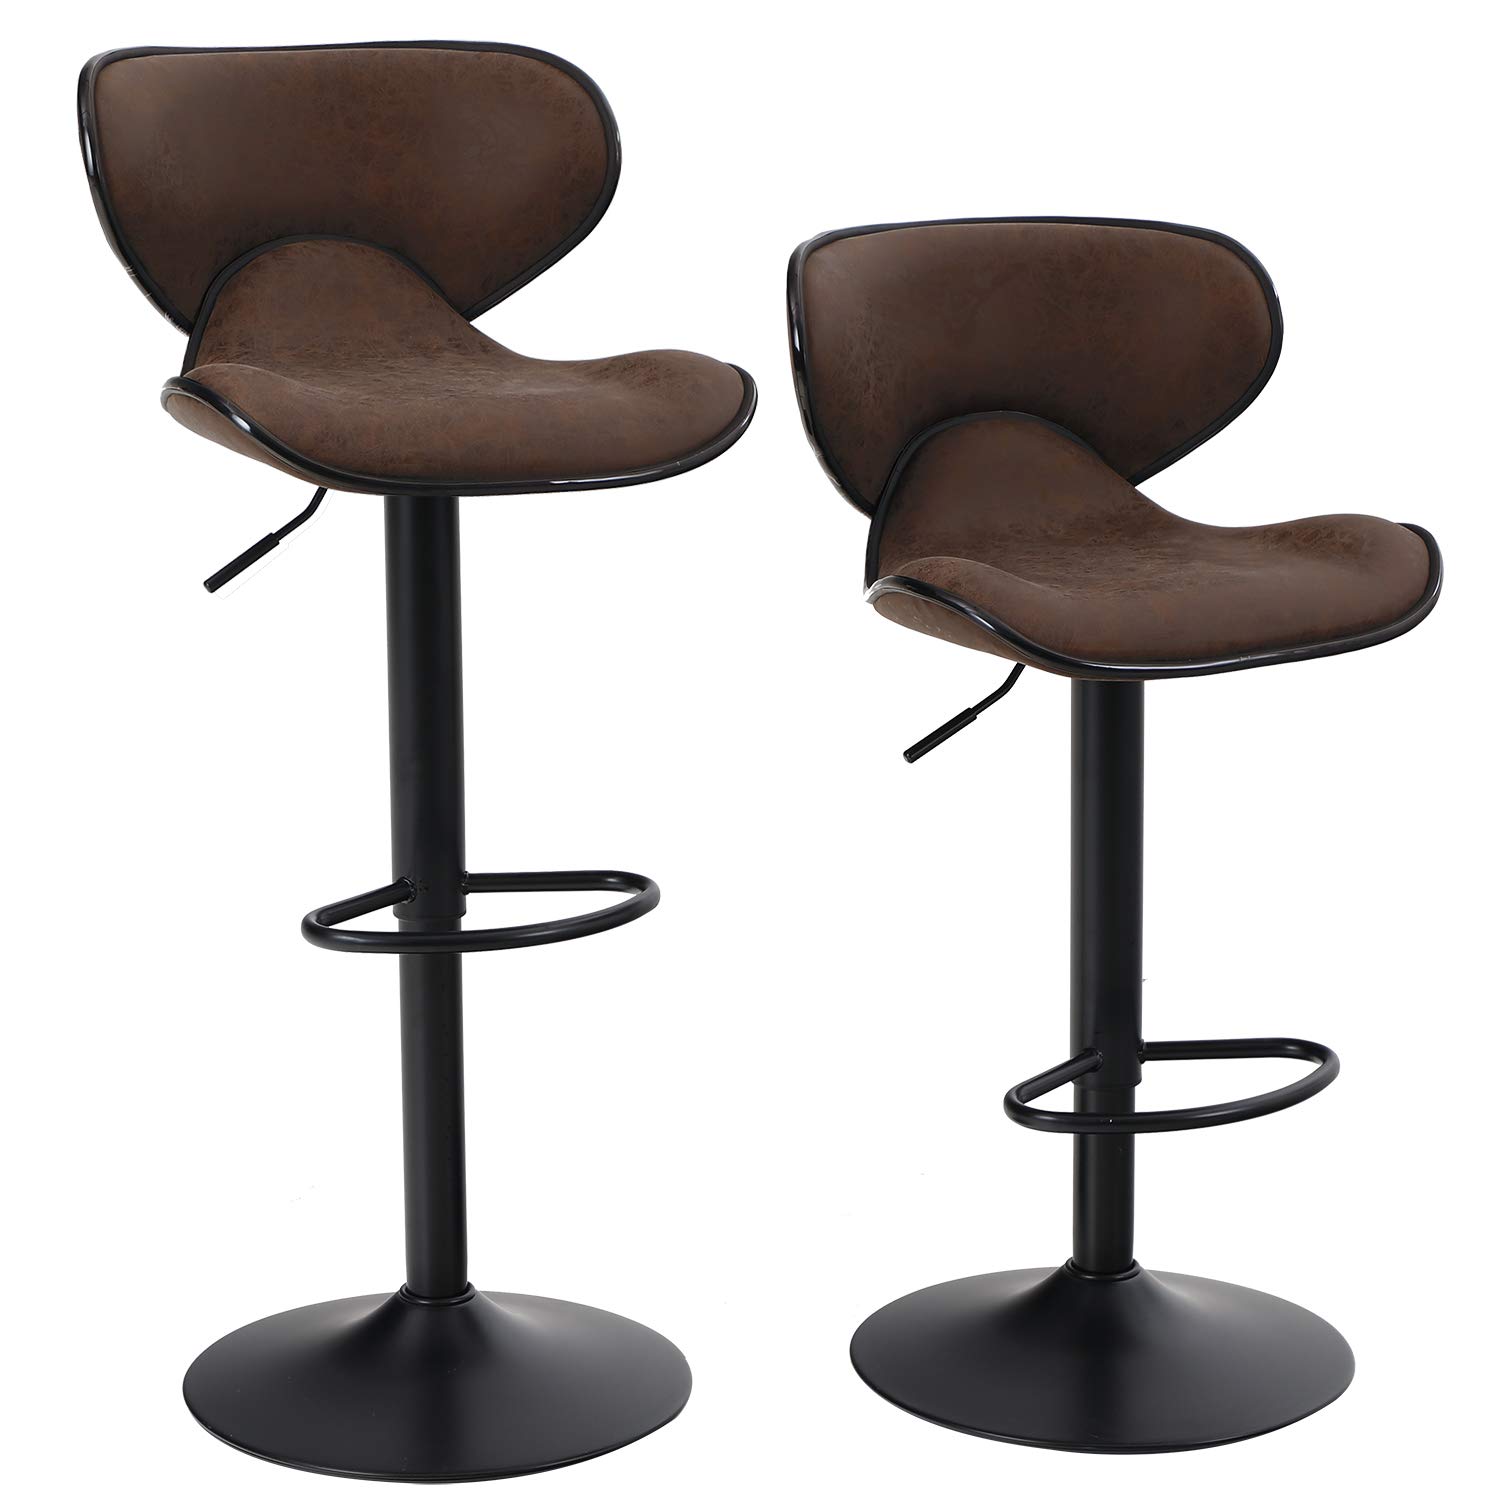 ALPHA HOME Bar Stools Counter Height Adjustable Swivel Bar Chair Modern Pu Leather Kitchen Counter Stools Dining Chairs Set of 2，350 lbs Capacity ,...